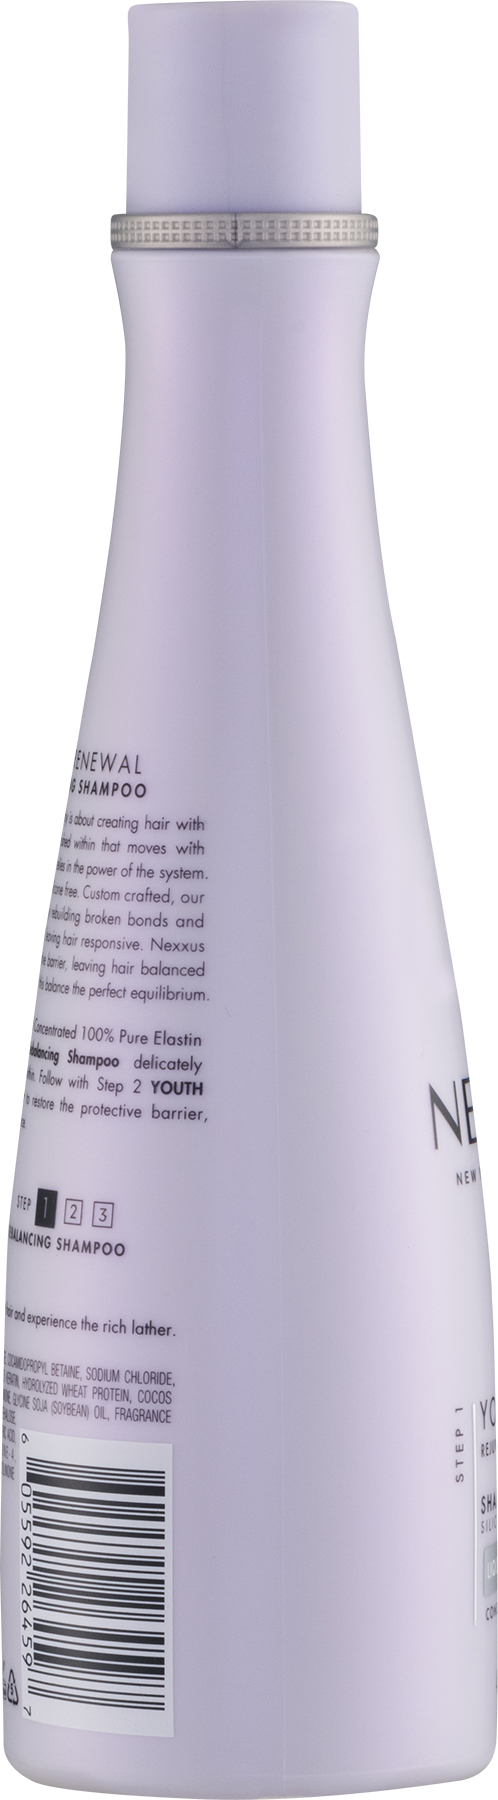 Youth Renewal for Aging Hair Shampoo 13.5 oz - image 4 of 9